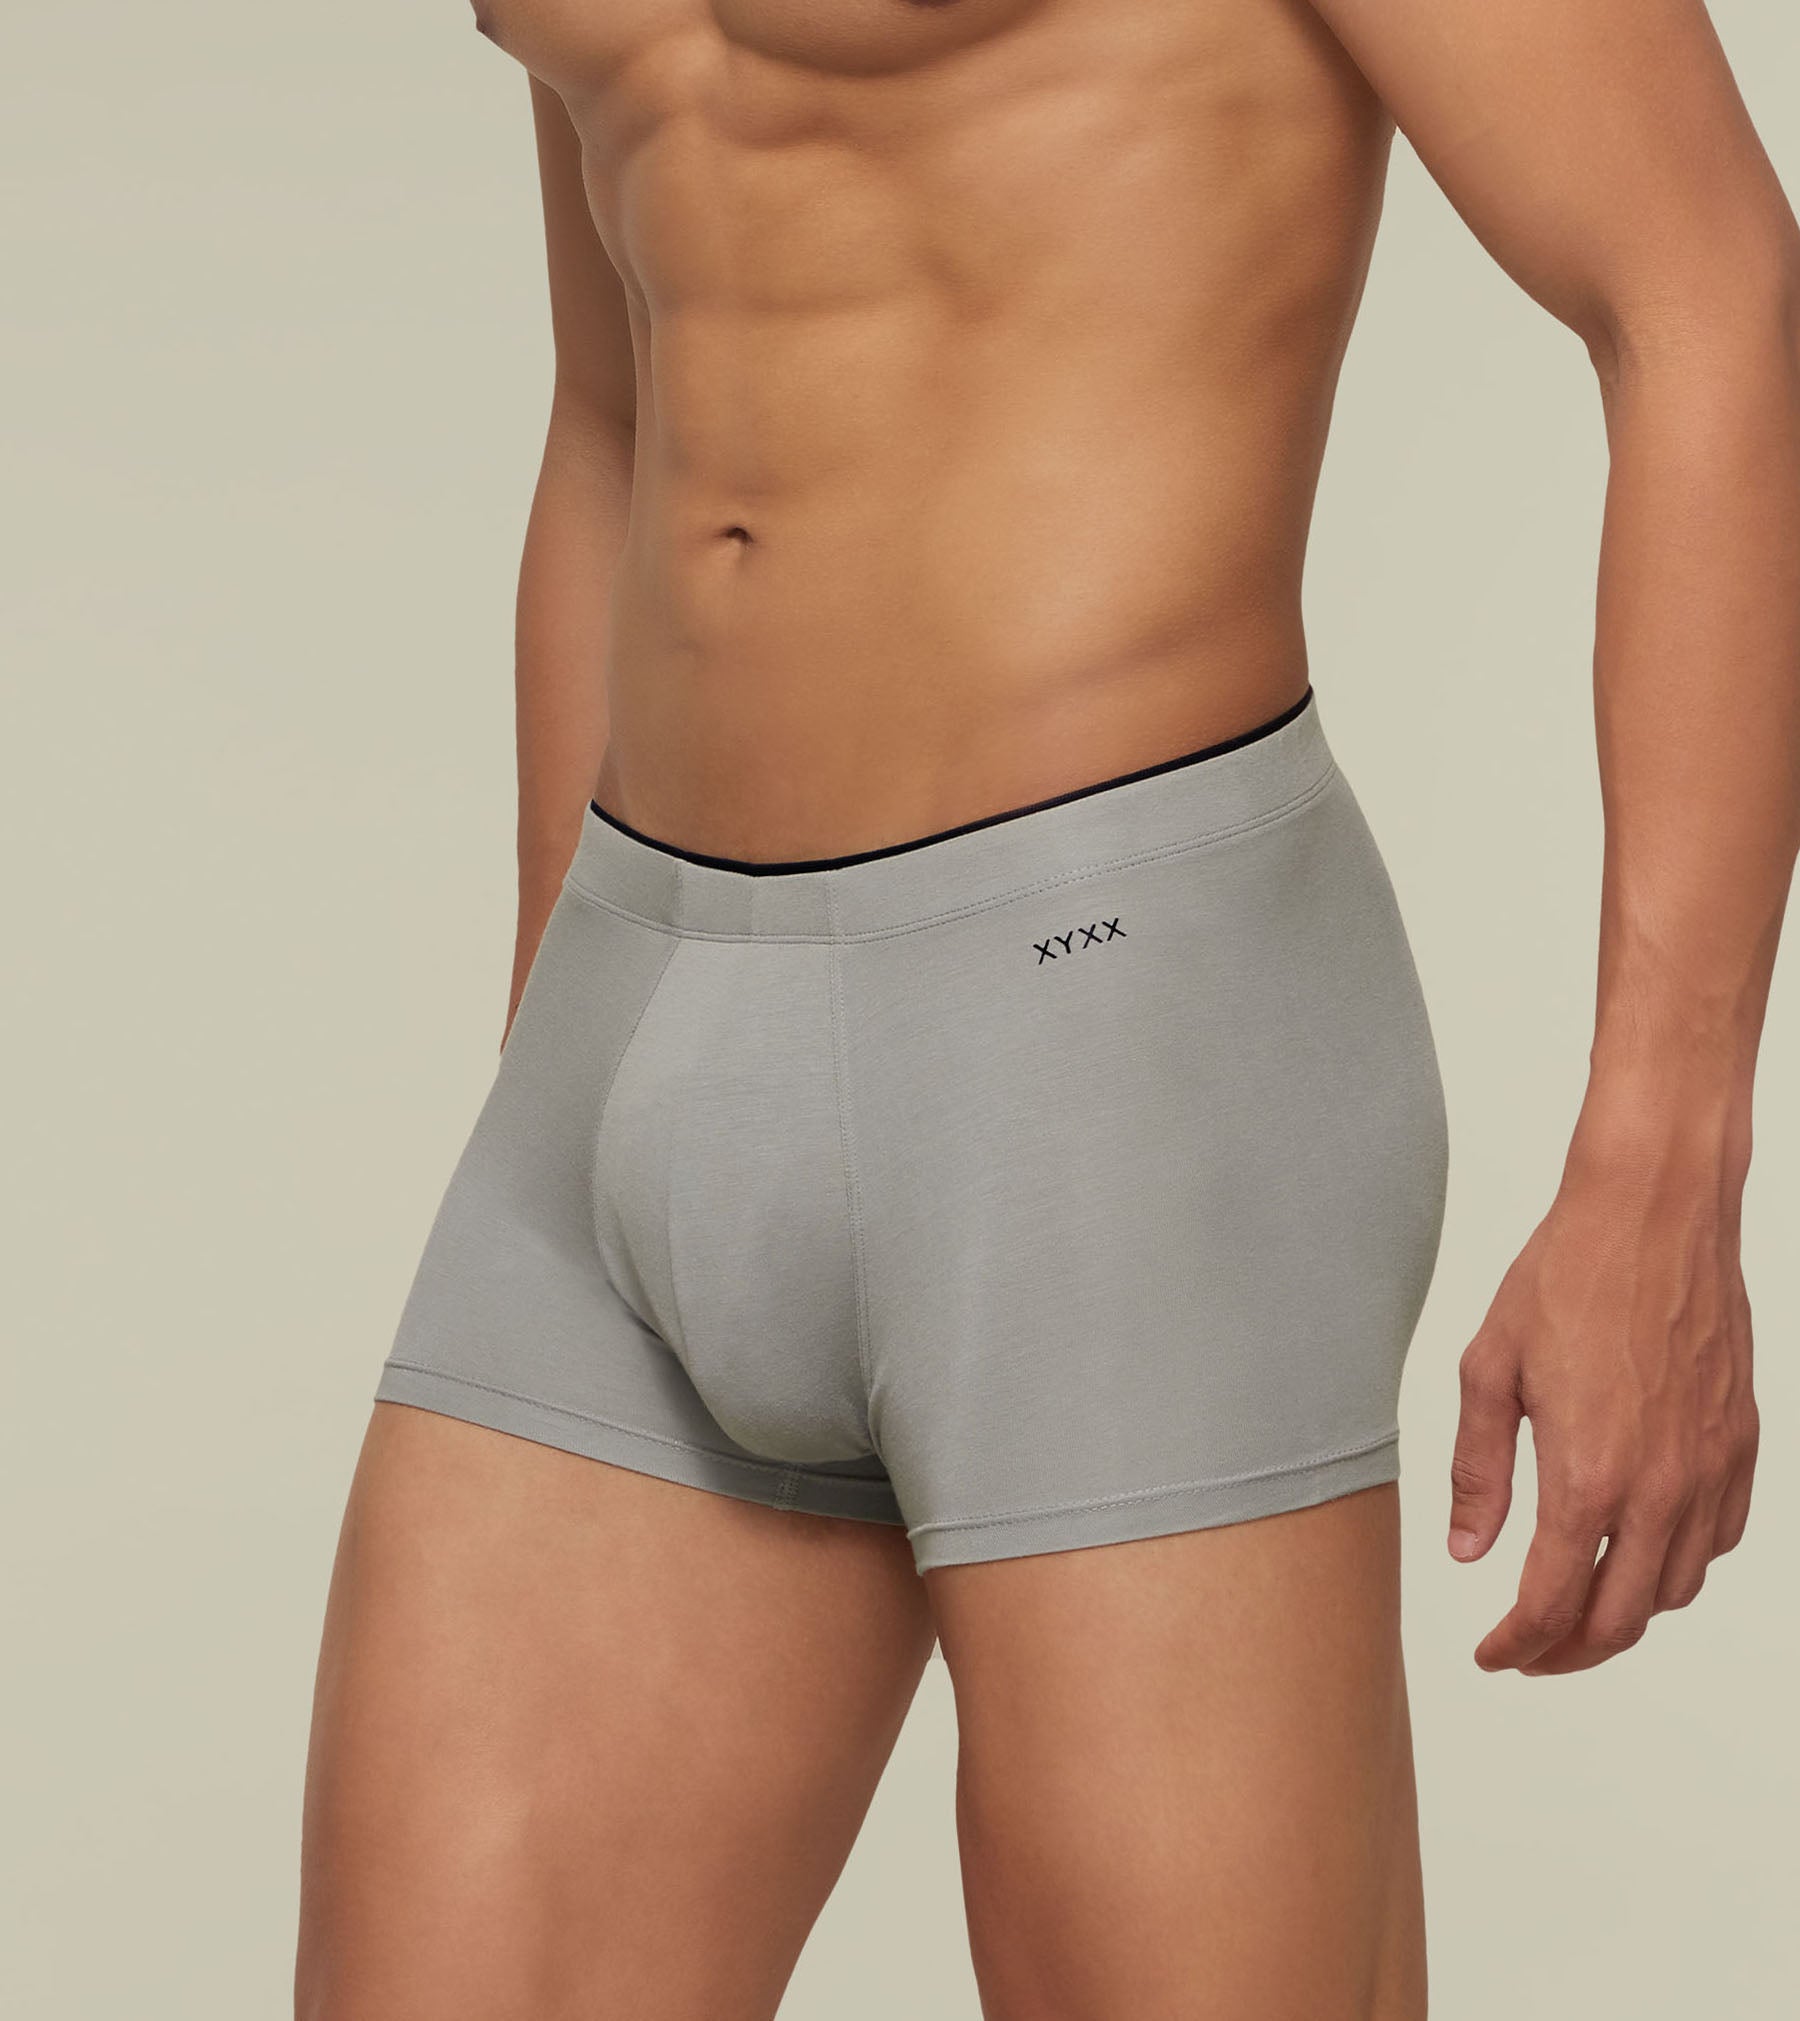 Buy online Men Grey Set Of 3 Solid Micro Modal Trunk Briefs from Innerwear  for Men by Freecultr for ₹999 at 38% off